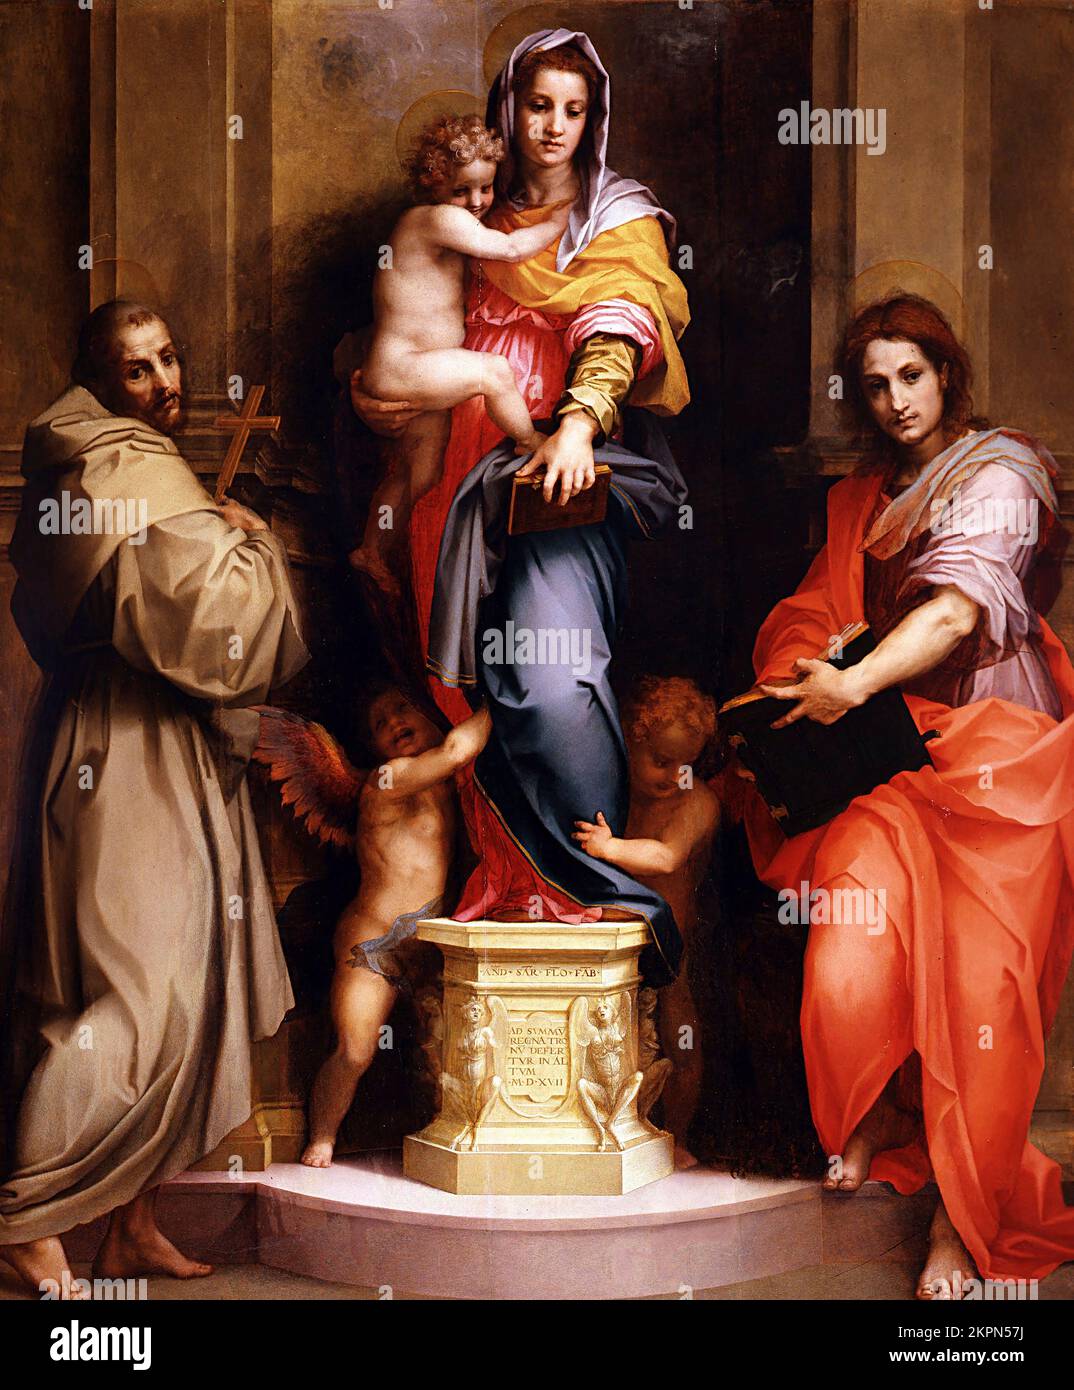 The Madonna of the Harpies by Andrea del Sarto (Andrea d'Agnolo: 1486-1530), oil on panel, 1517 Stock Photo